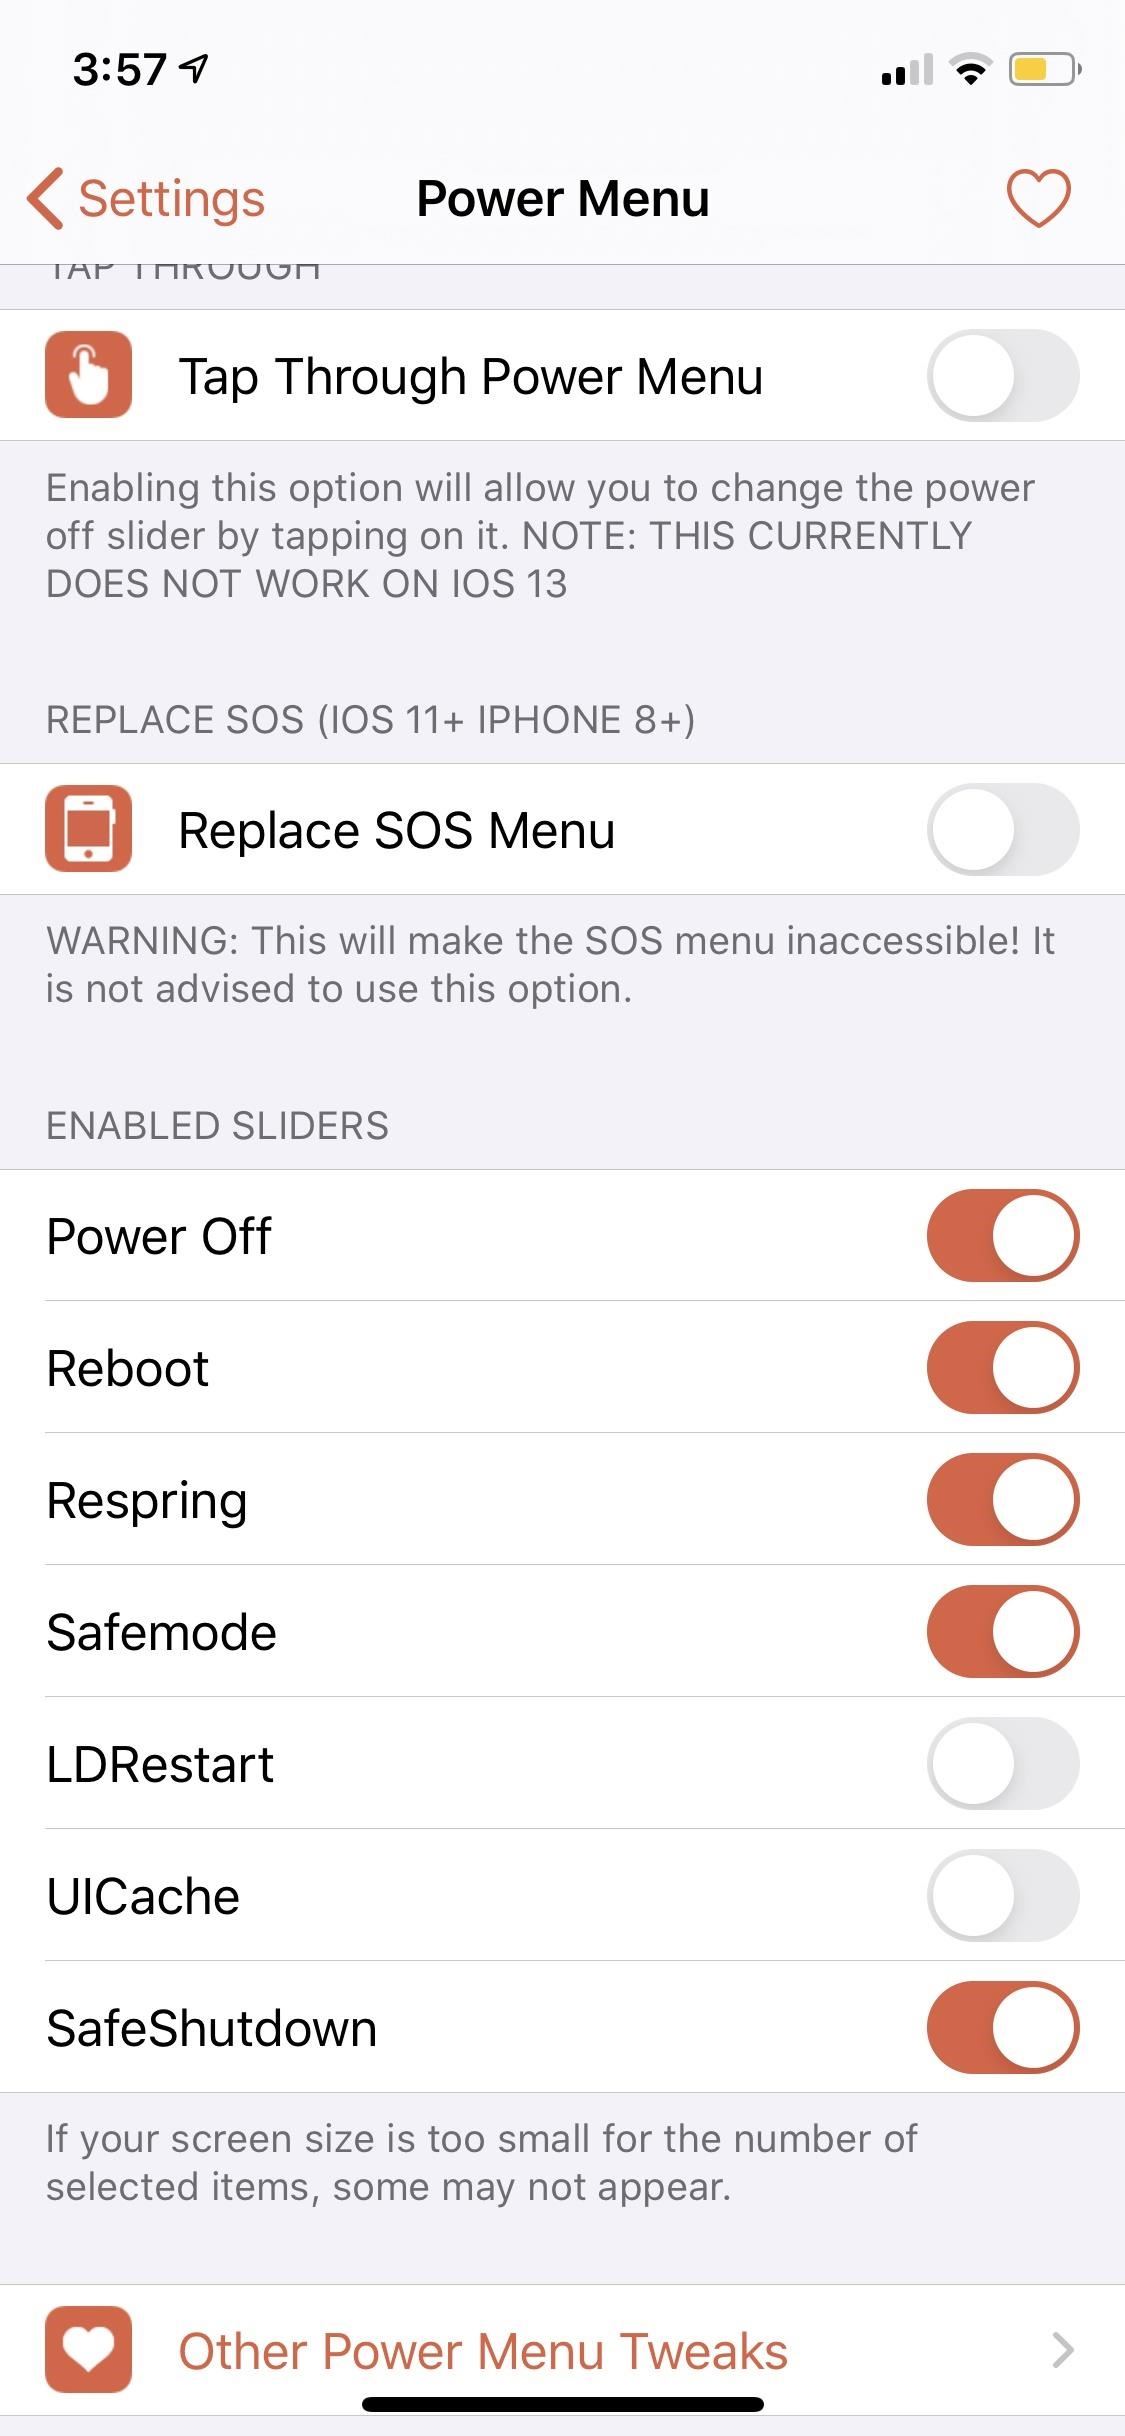 This Tweak Puts Your iPhone in Hibernation Mode to Save Tons of Battery